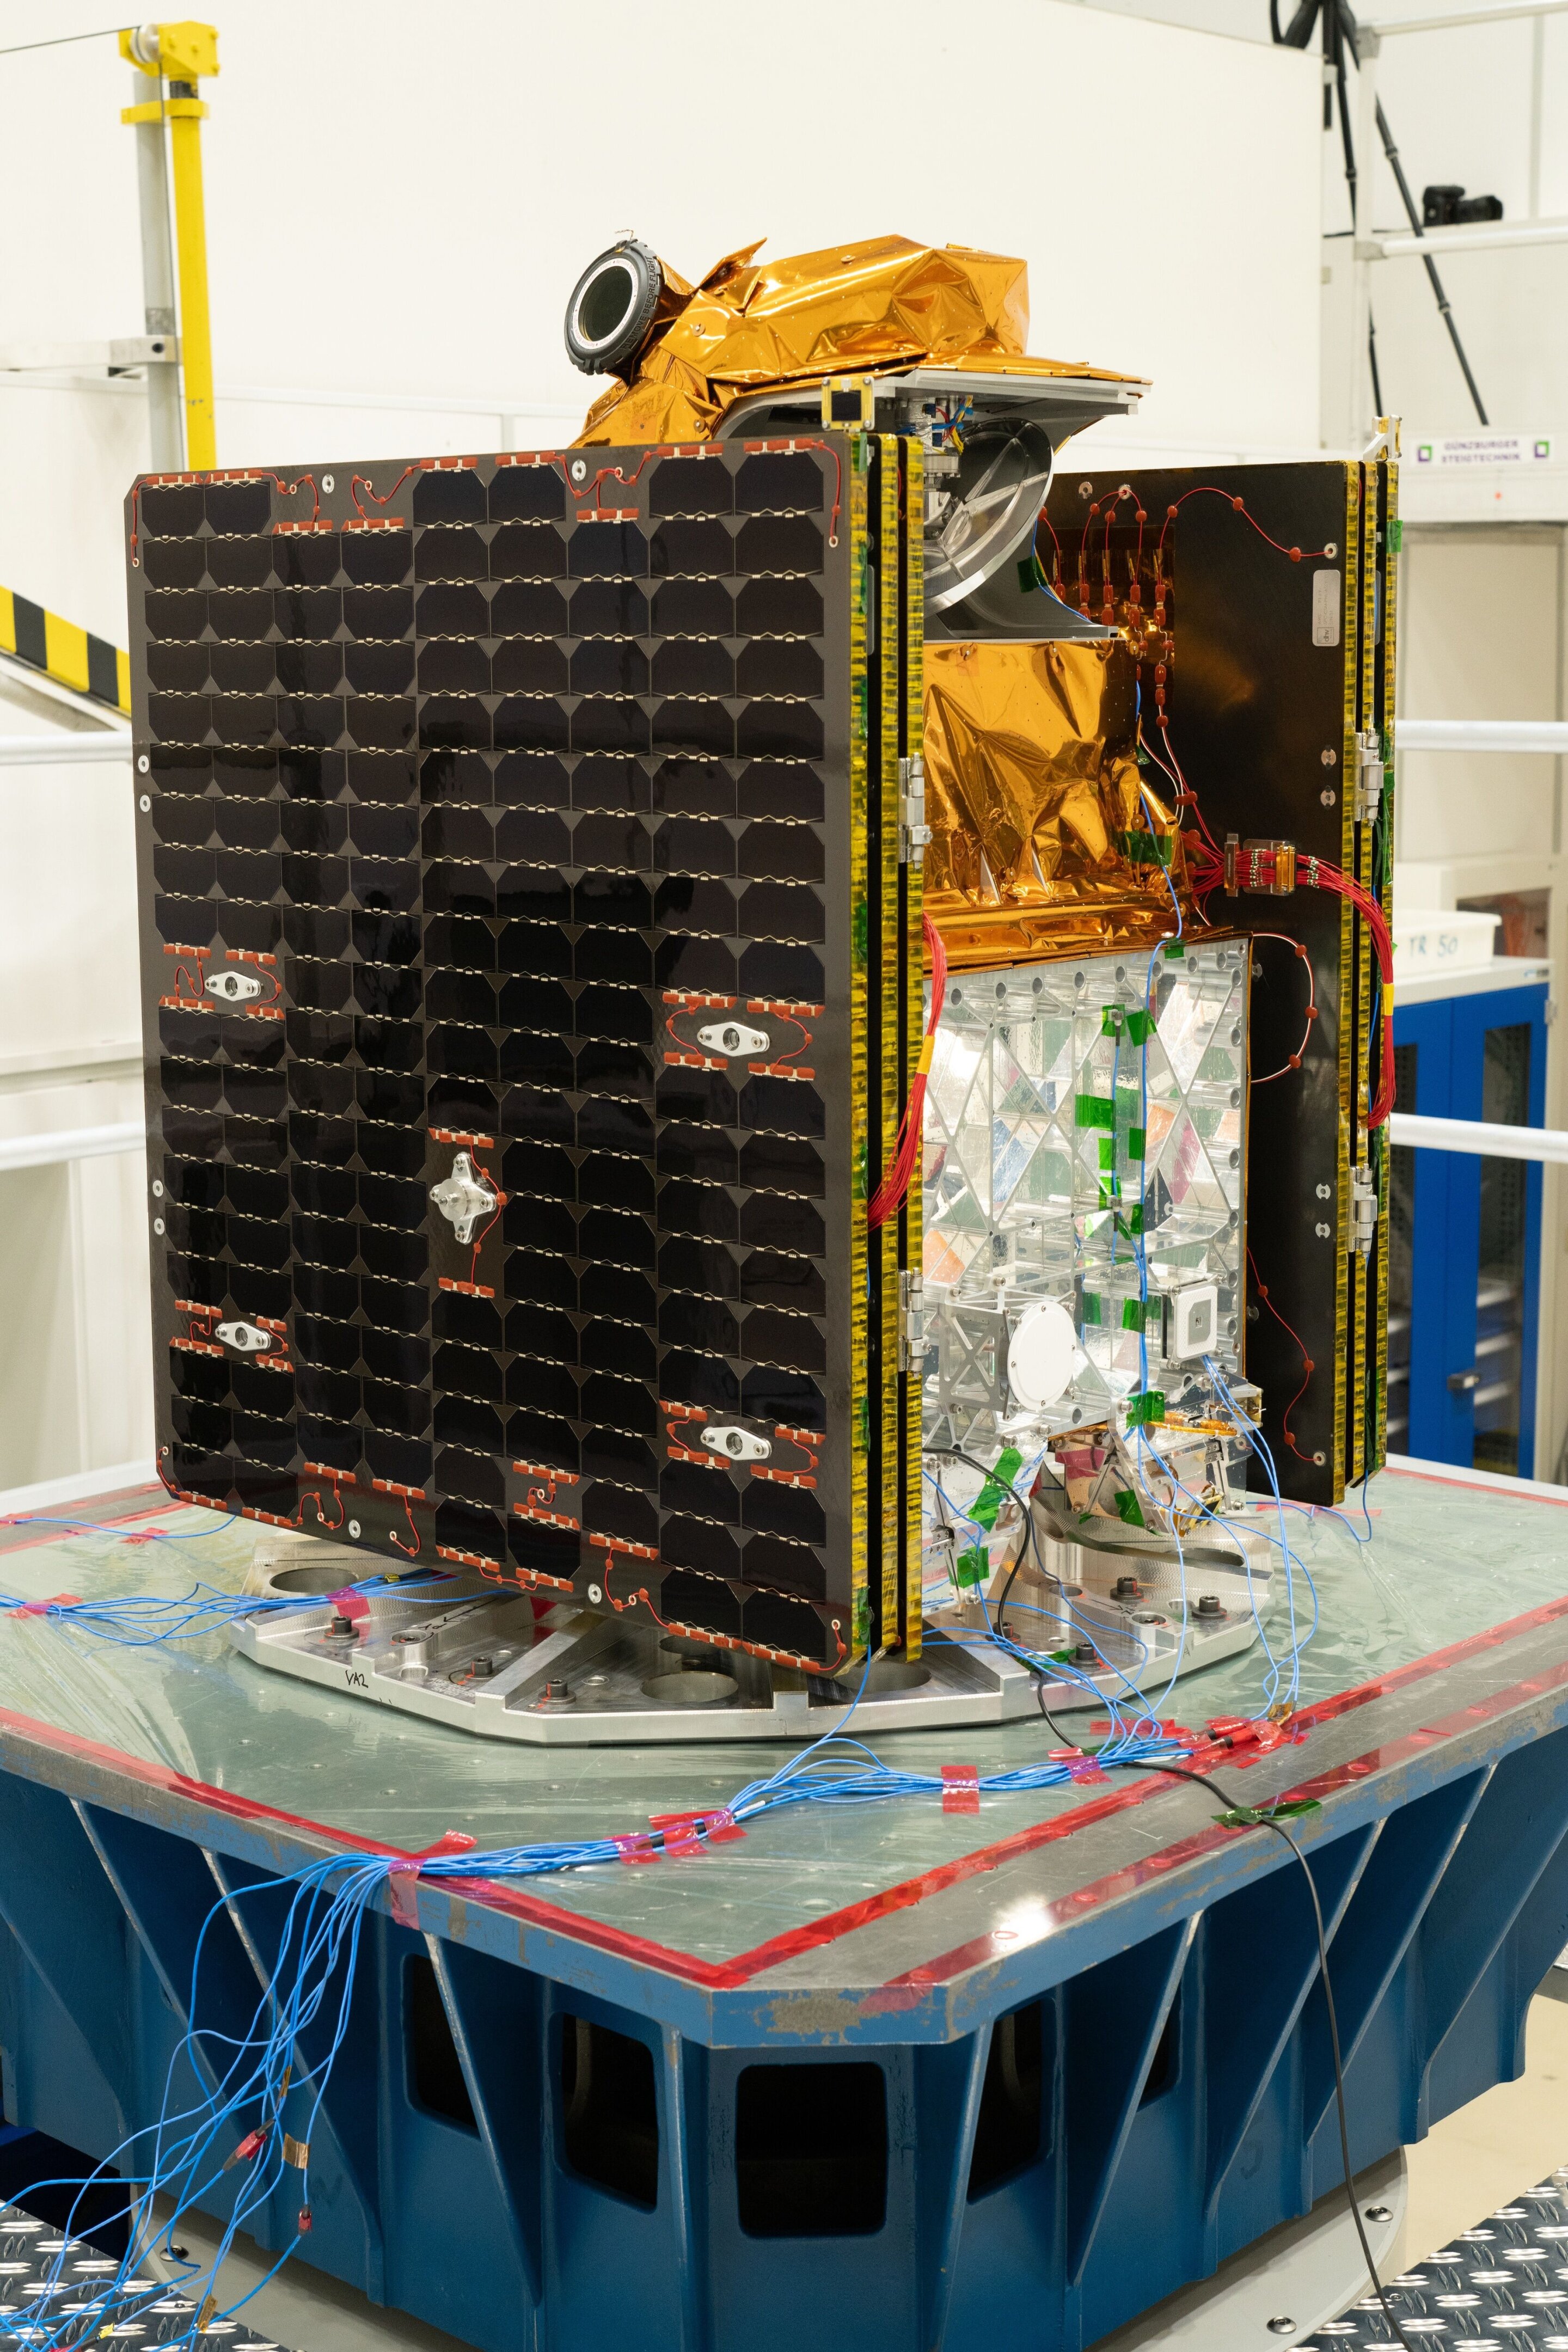 Arctic Weather Satellite tested for life in orbit